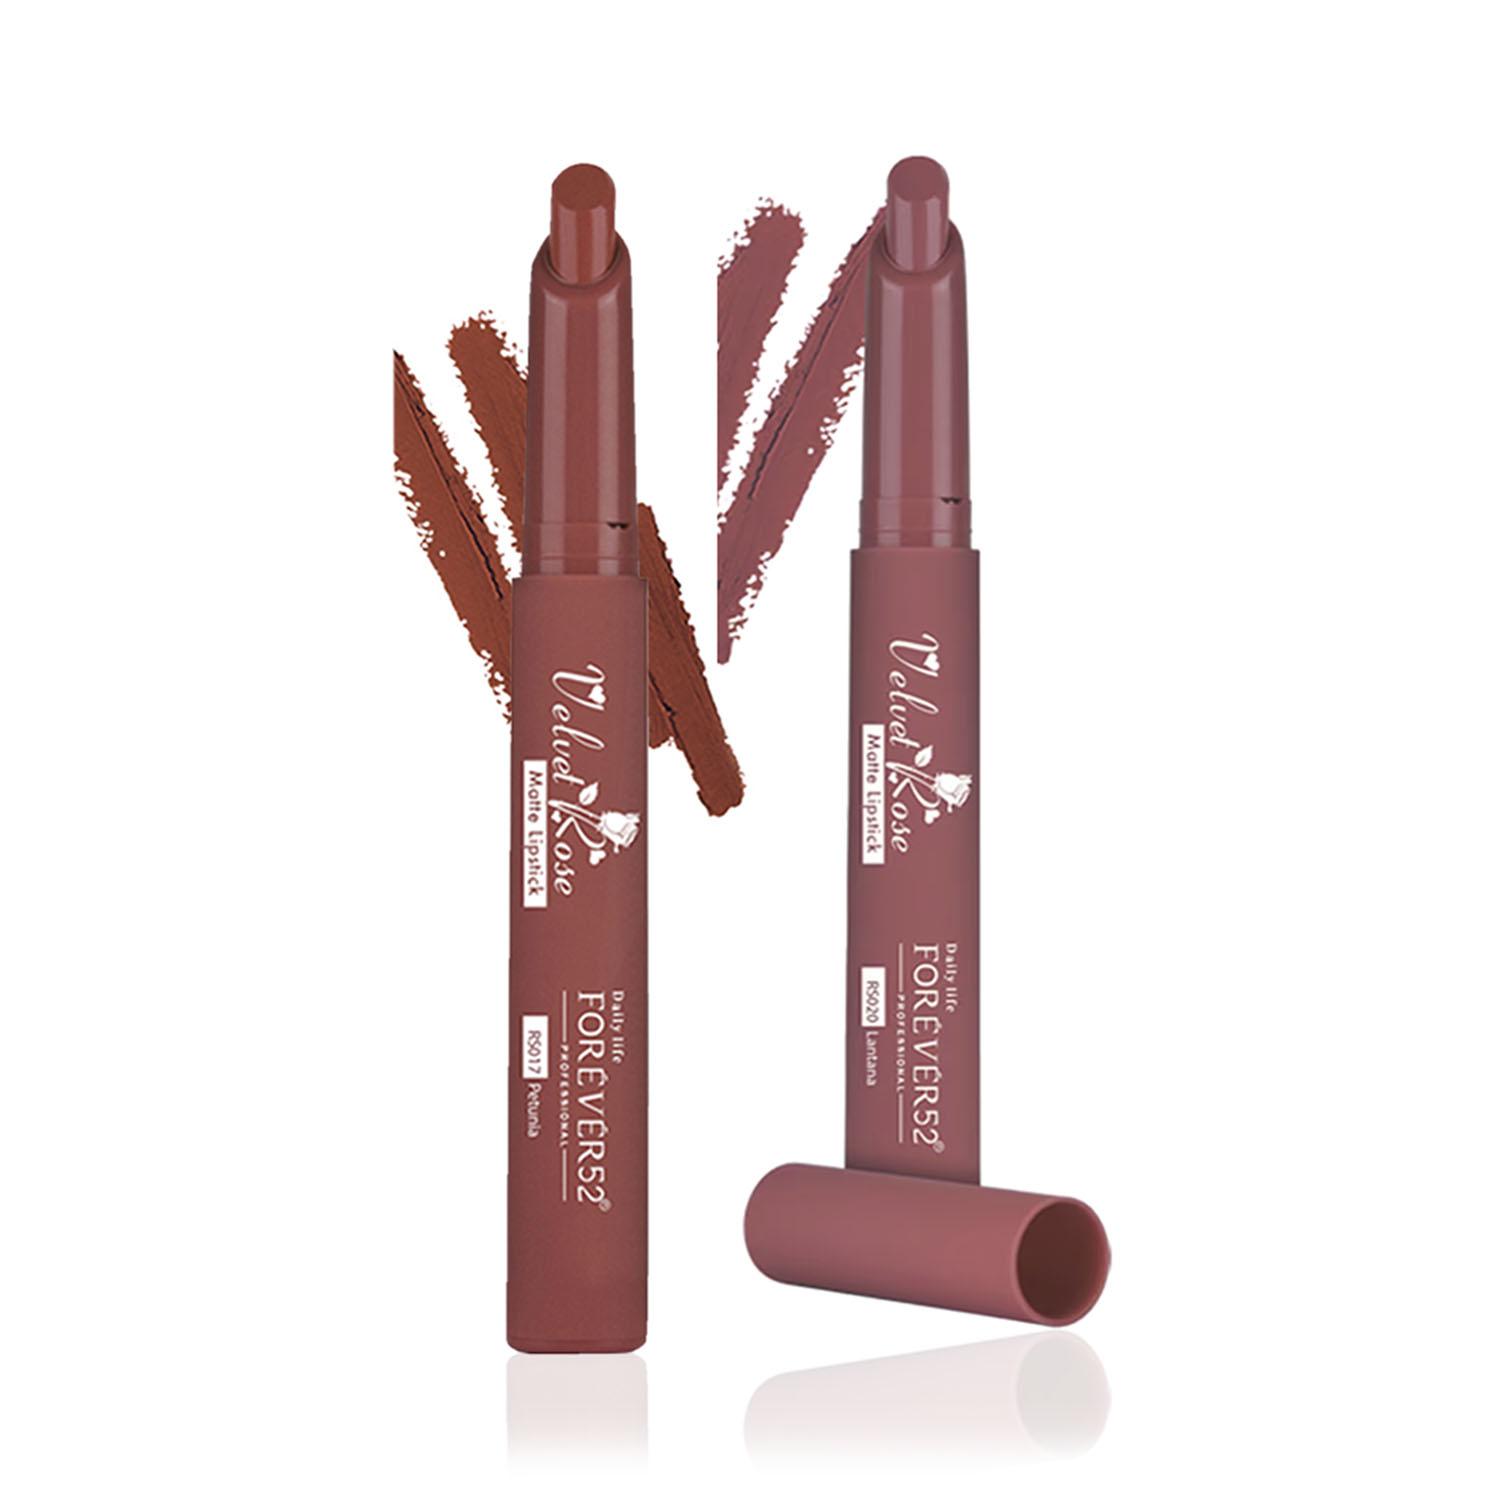 Daily Life Forever52 | Daily Life Forever52 Velvet Rose Matte Lipstick Set of 2 Crayons Combo (Petunia,Latana)